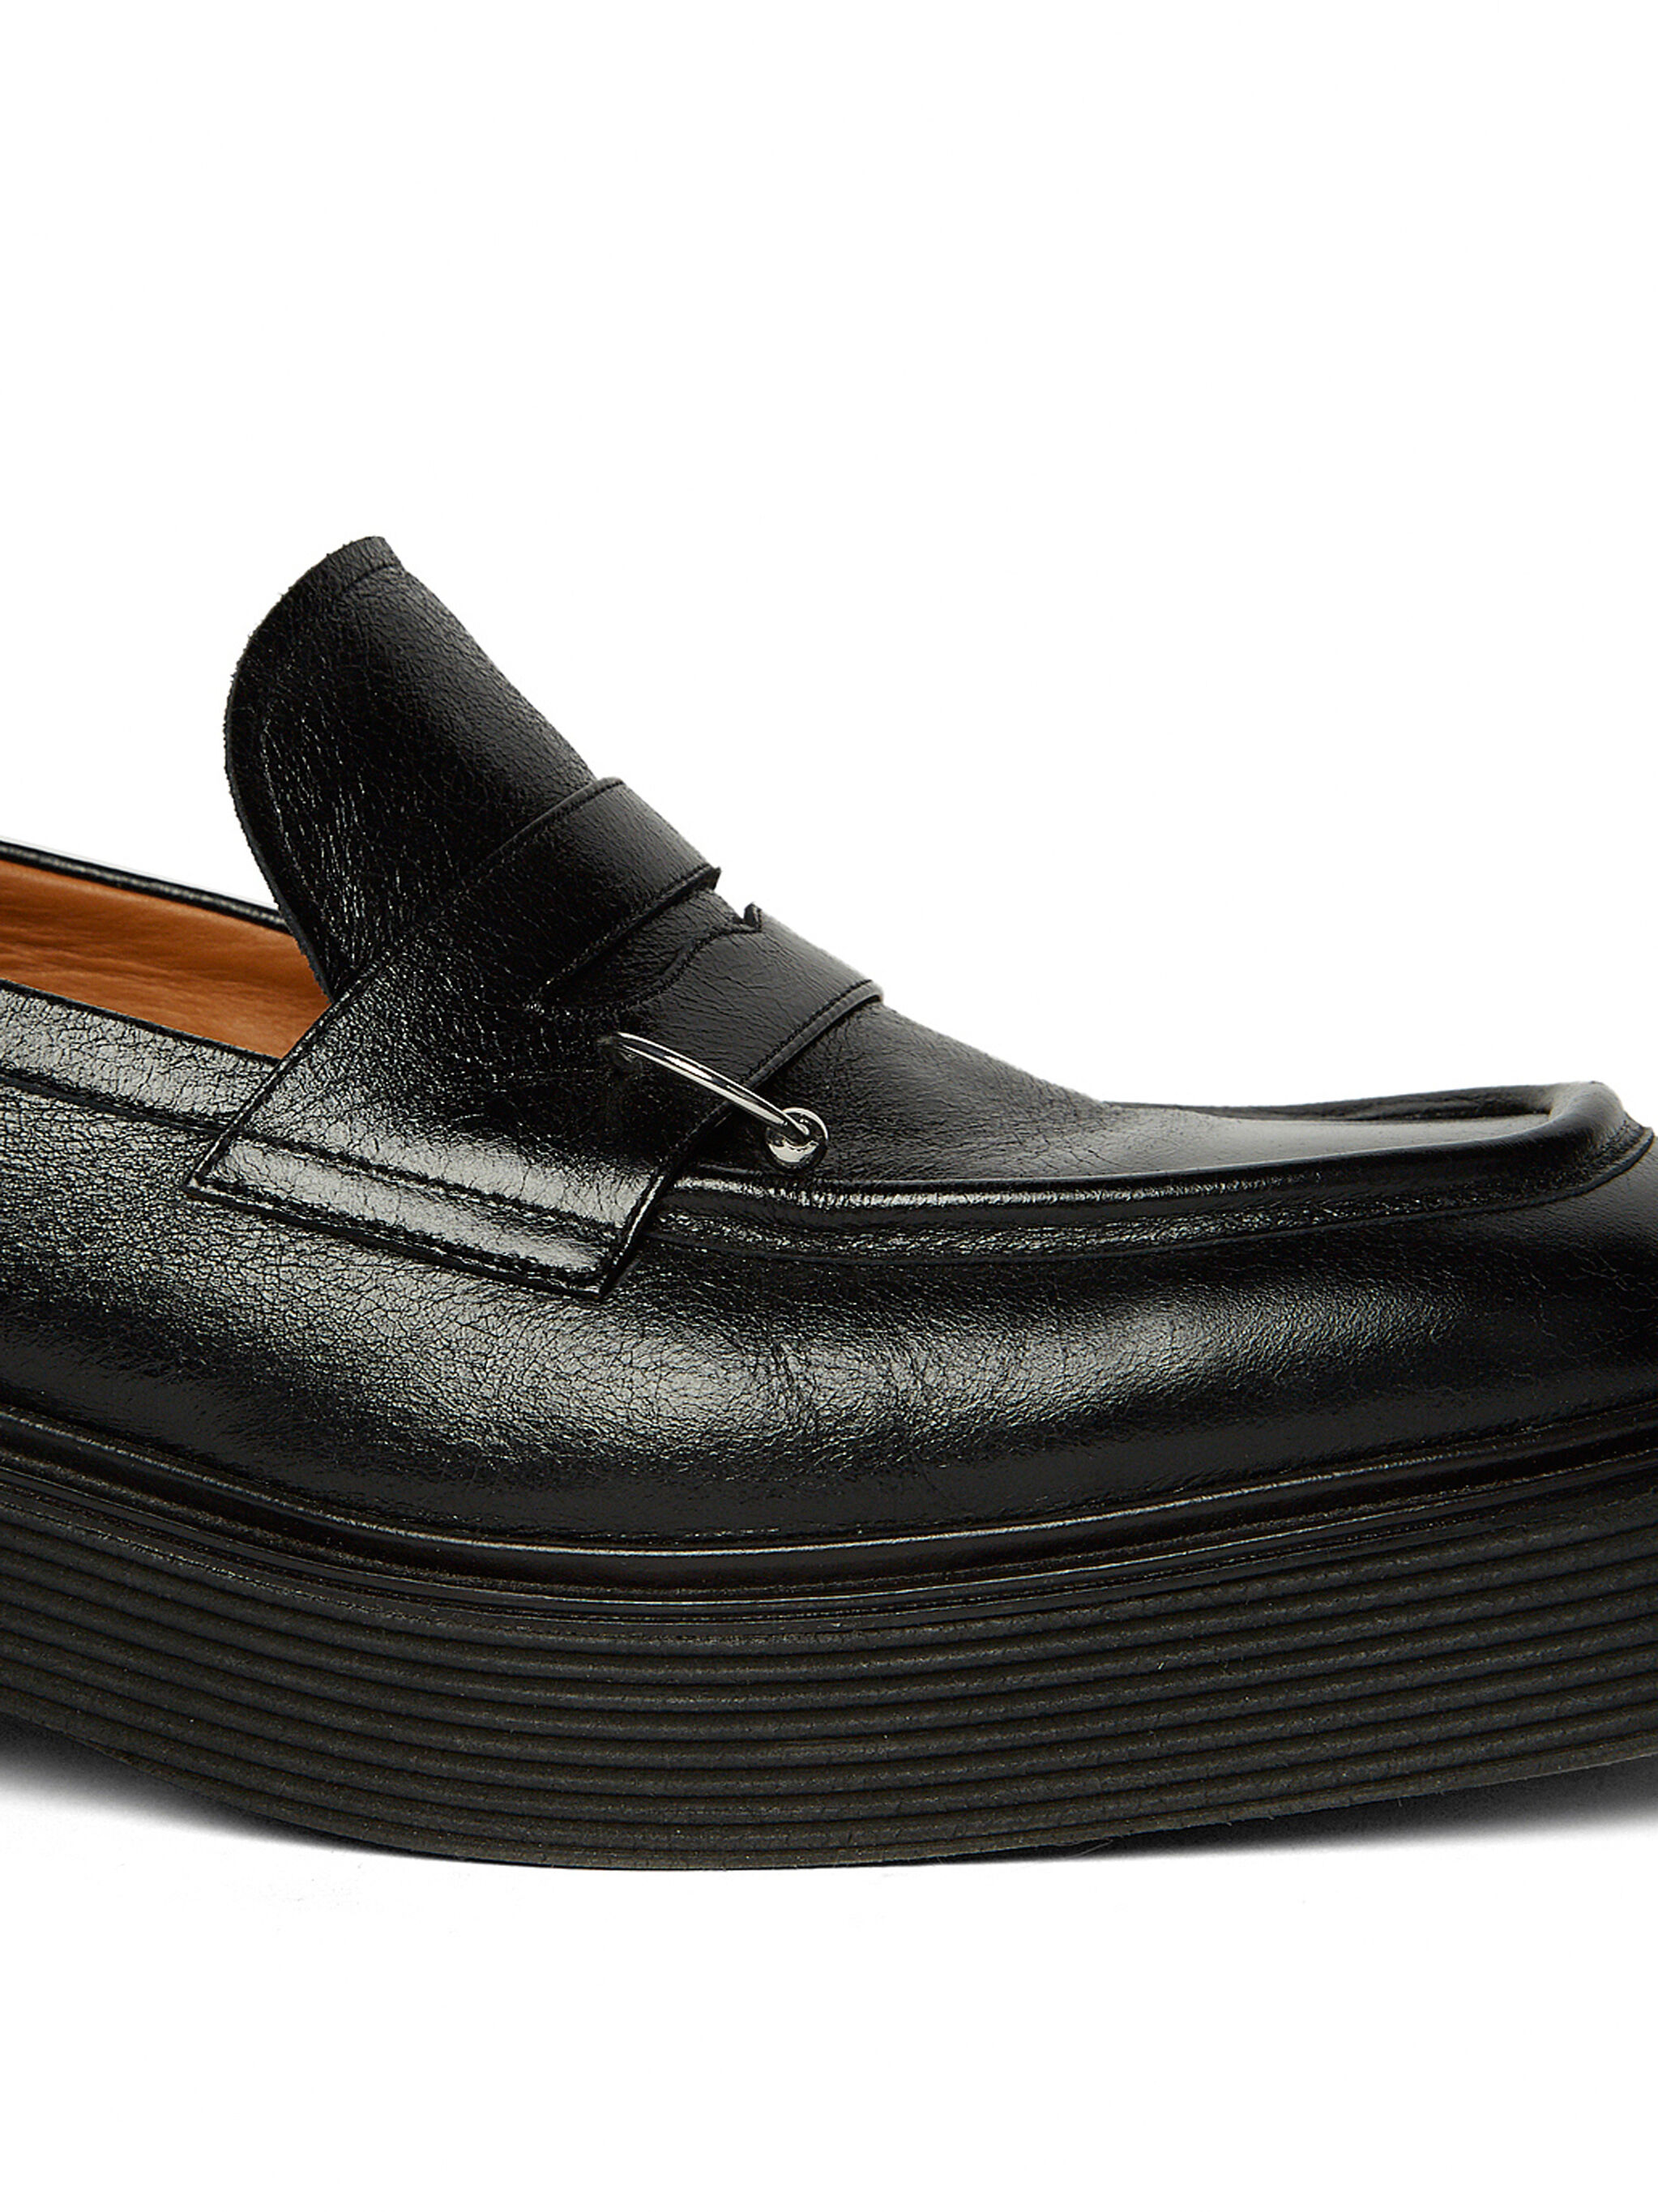 Marni Pierced Penny Loafers | THE FLAMEL®